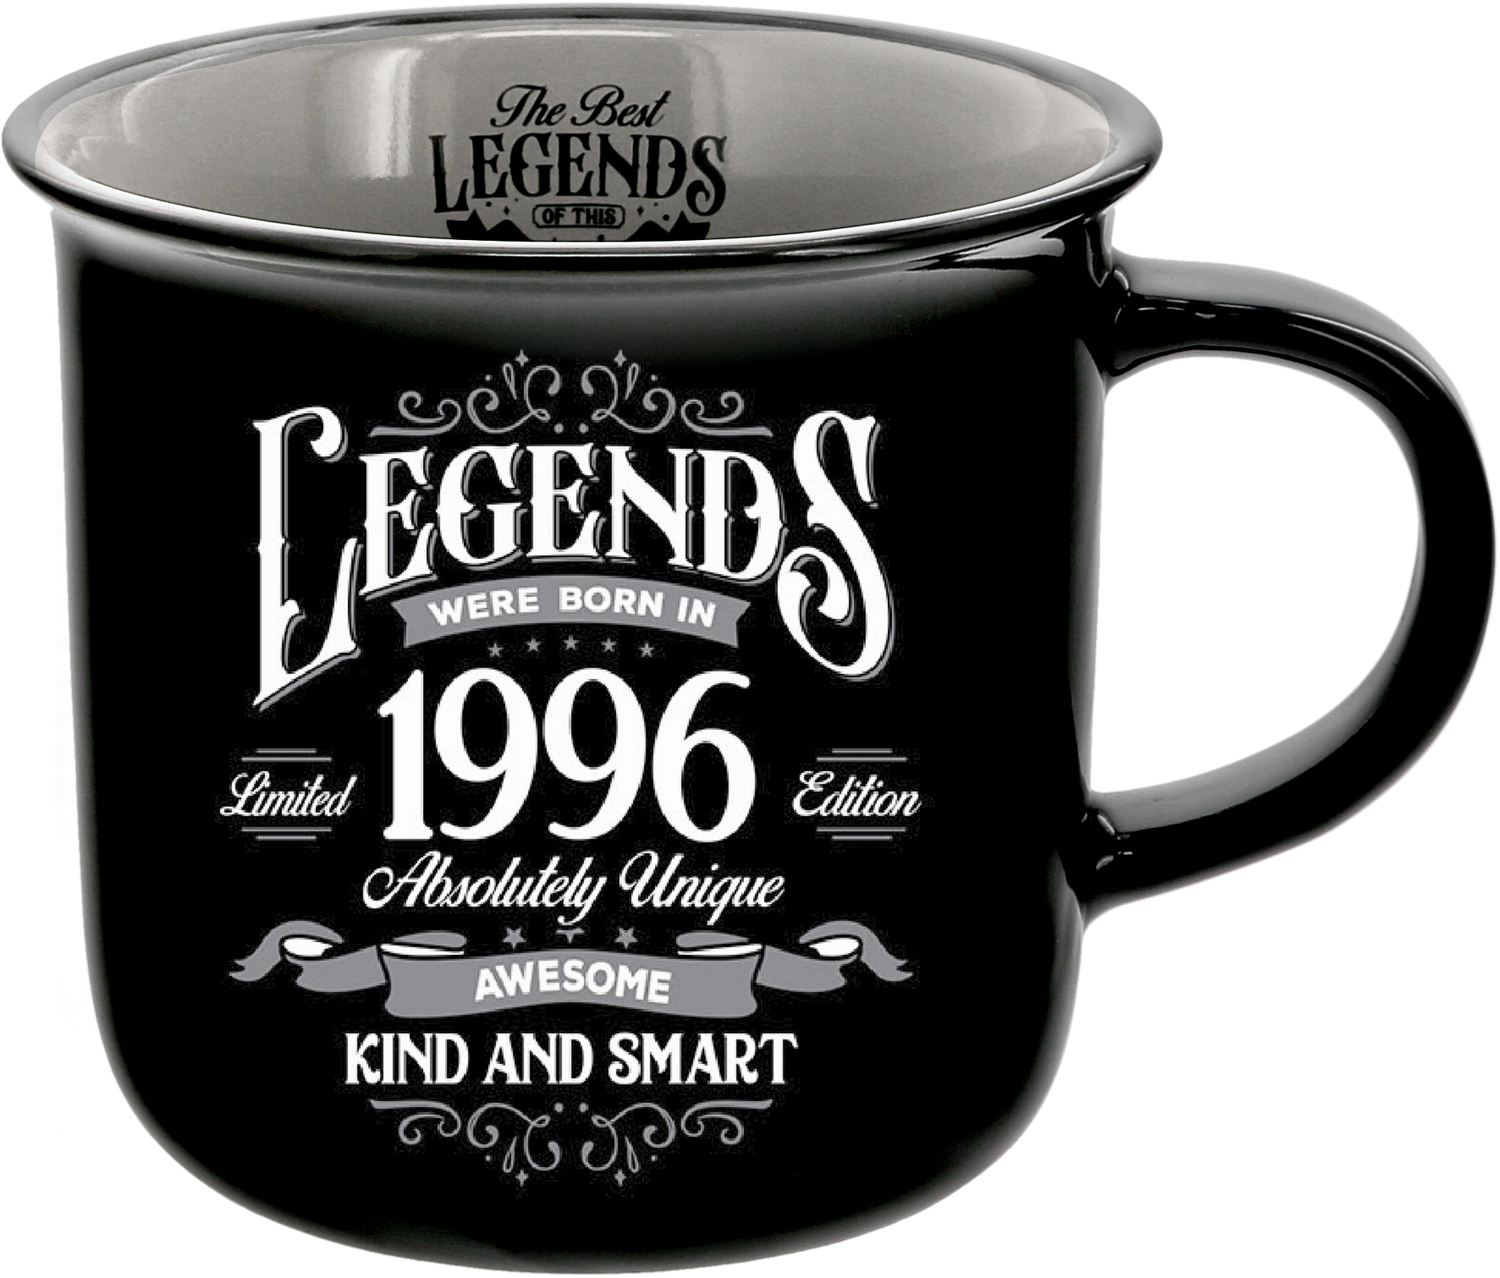 1996 by Legends of this World - 1996 - 13 oz Mug